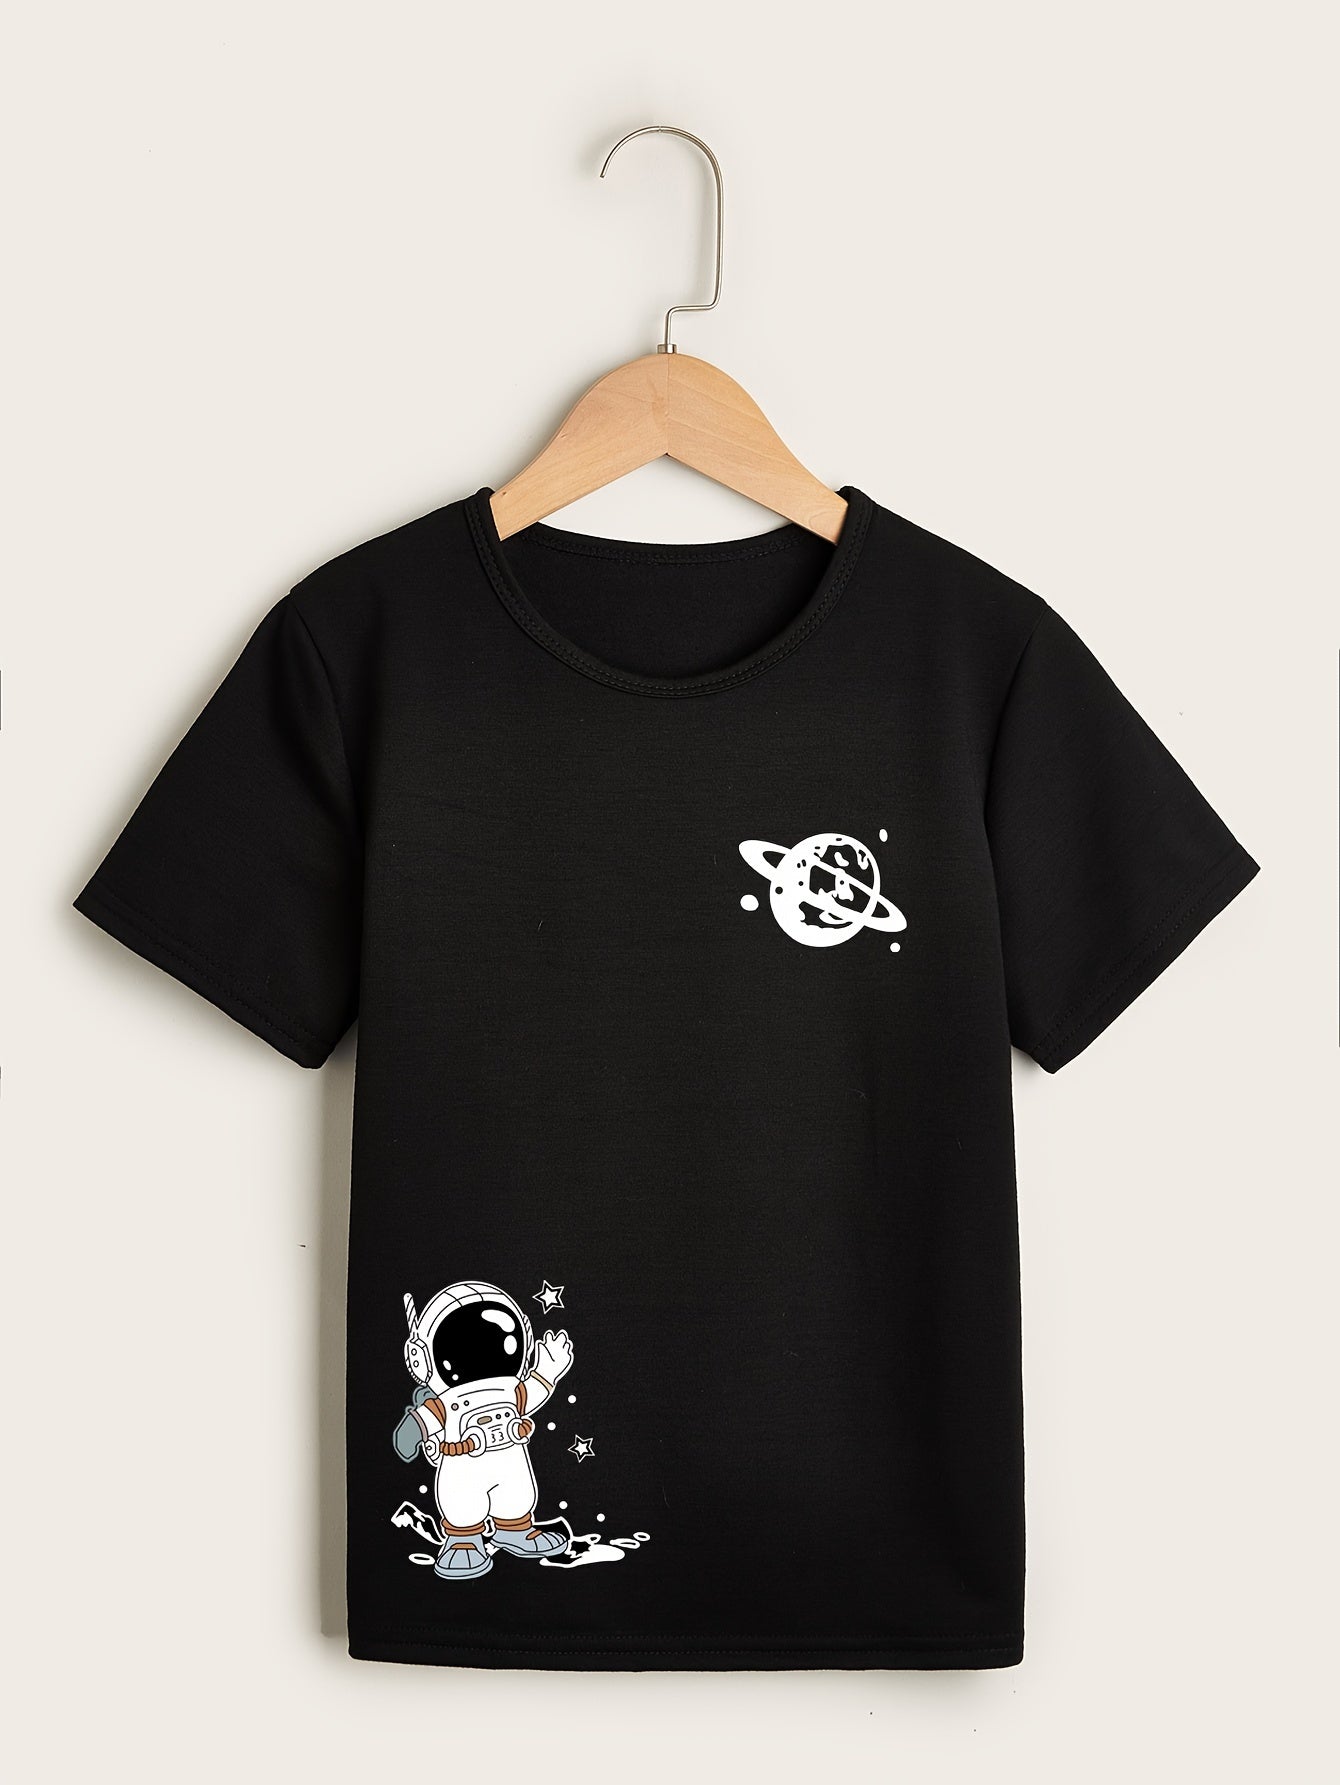 Boys Cartoon Astronaut Print T-Shirt, Breathable Comfortable Casual Round Neck Tees Tops For Infant Toddlers Kids Children Summer